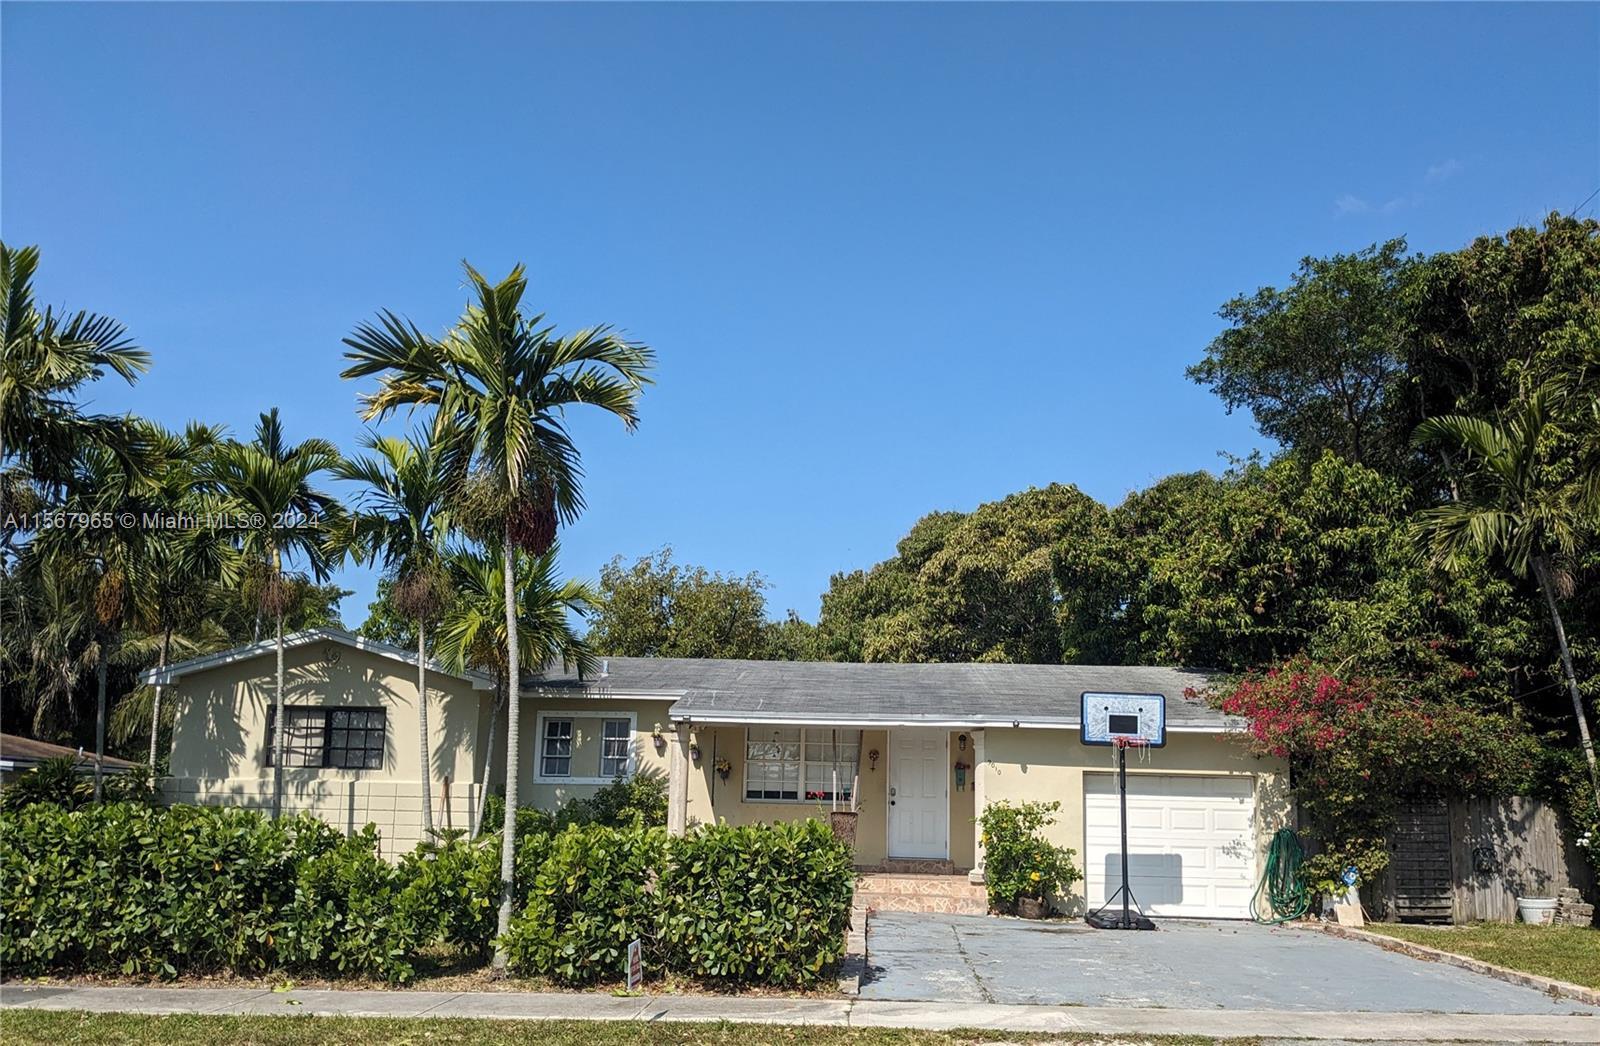 Photo of 9010 NW 3rd Ave in El Portal, FL